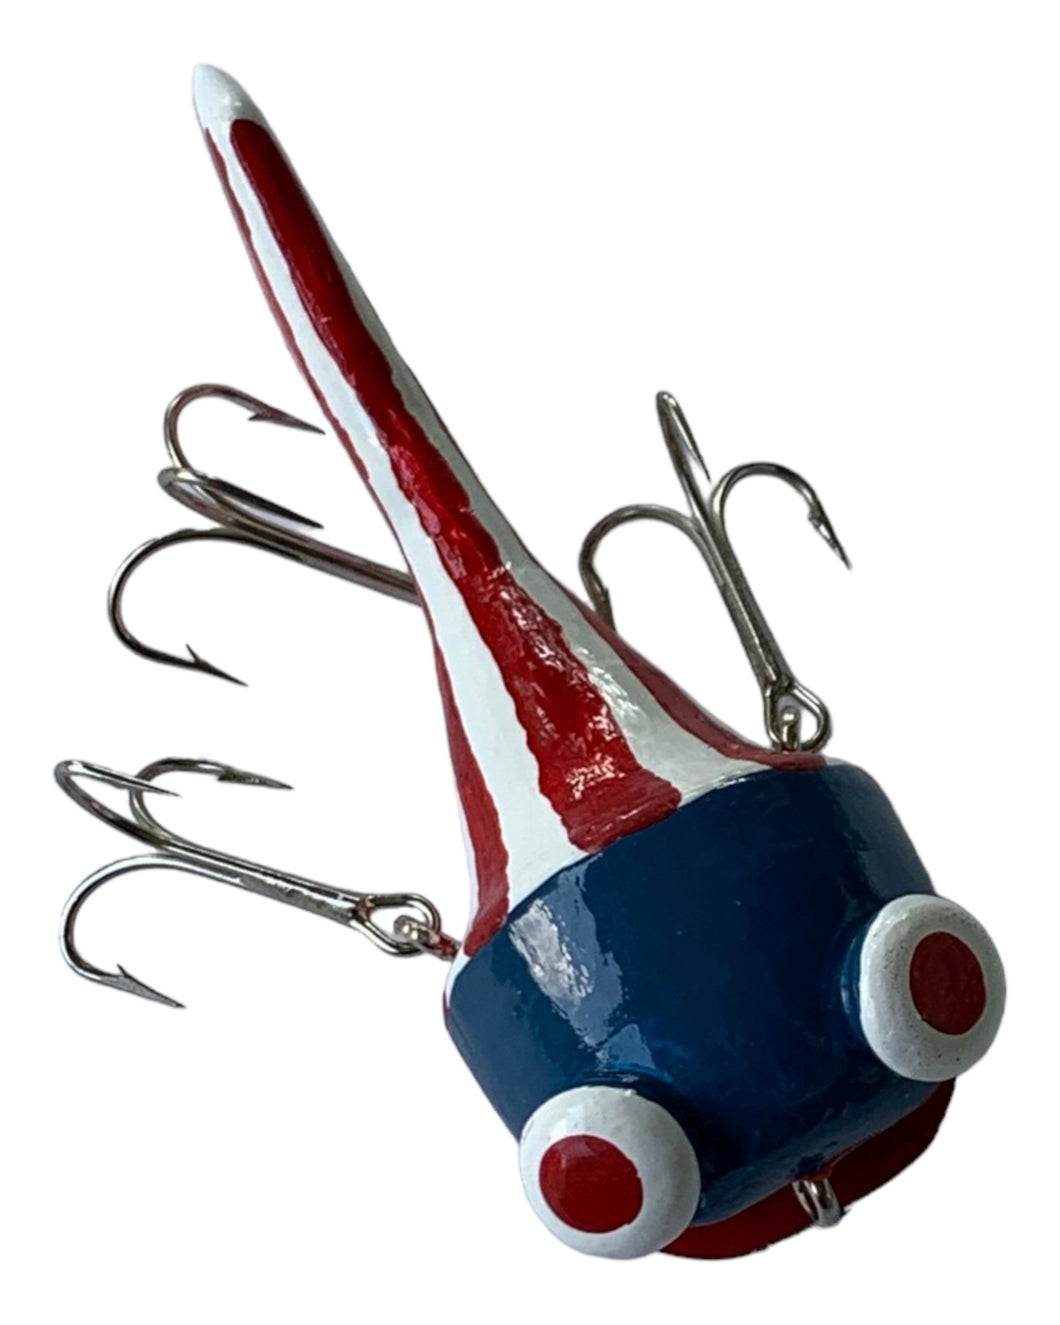 Top View of USA Flag FROGGISH Fishing Lure Handmade by MARK M. DEVLIN JR. Available at Toad Tackle.